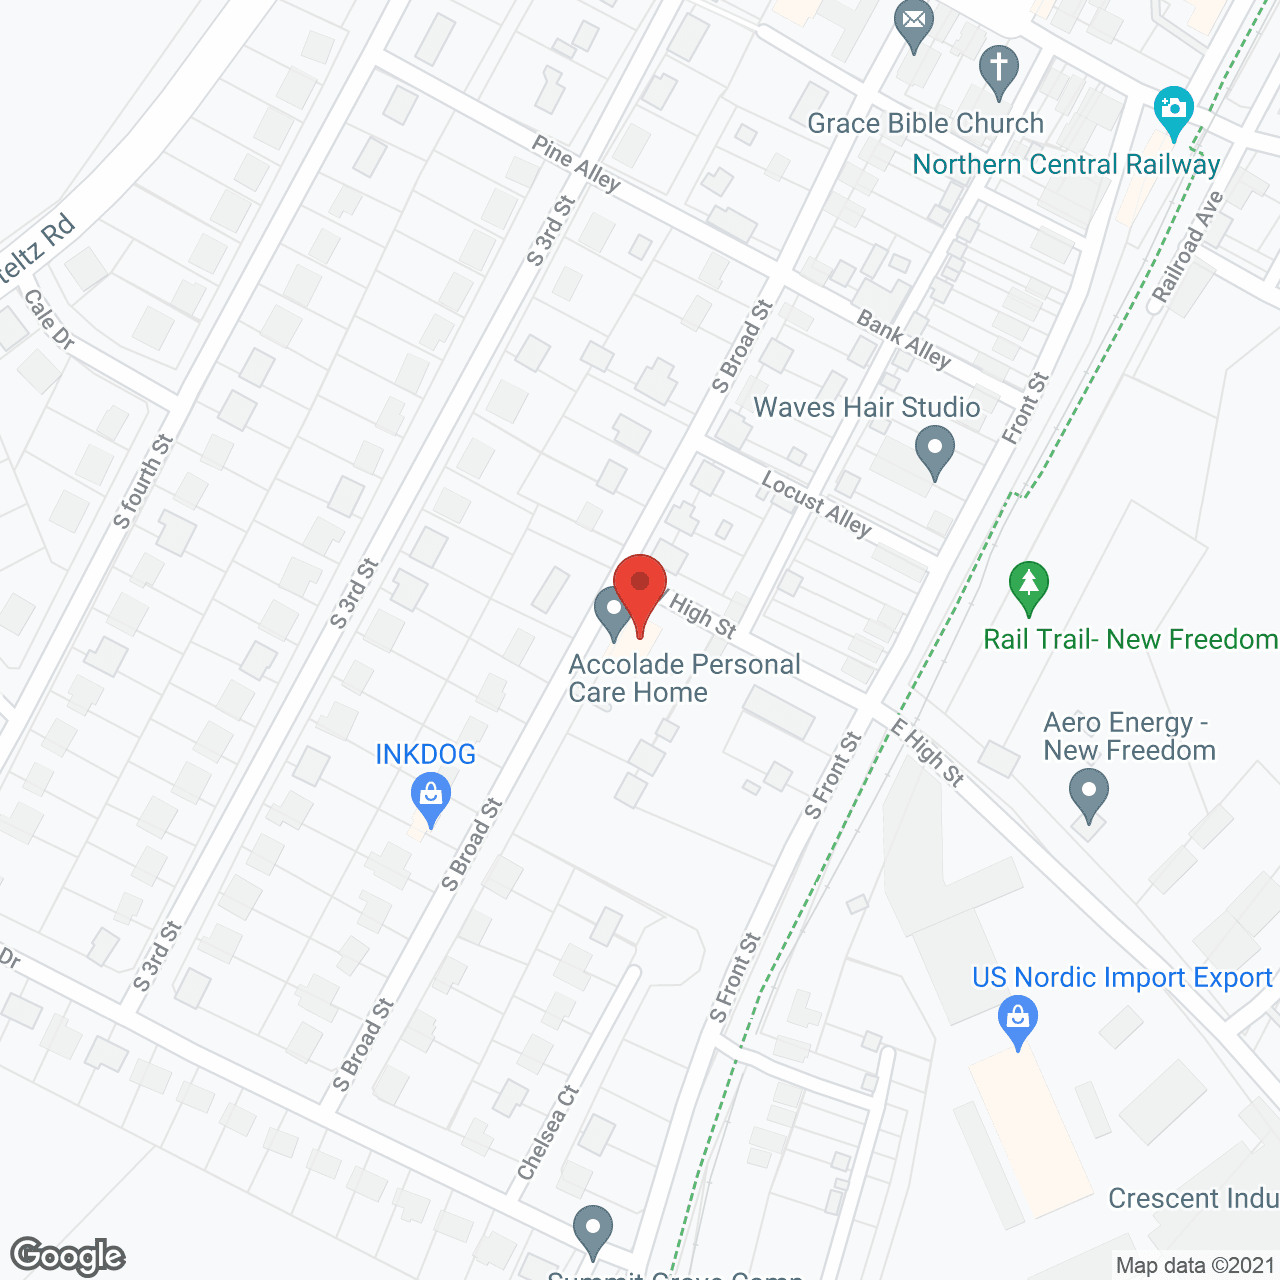 Accolades Personal Care Home in google map